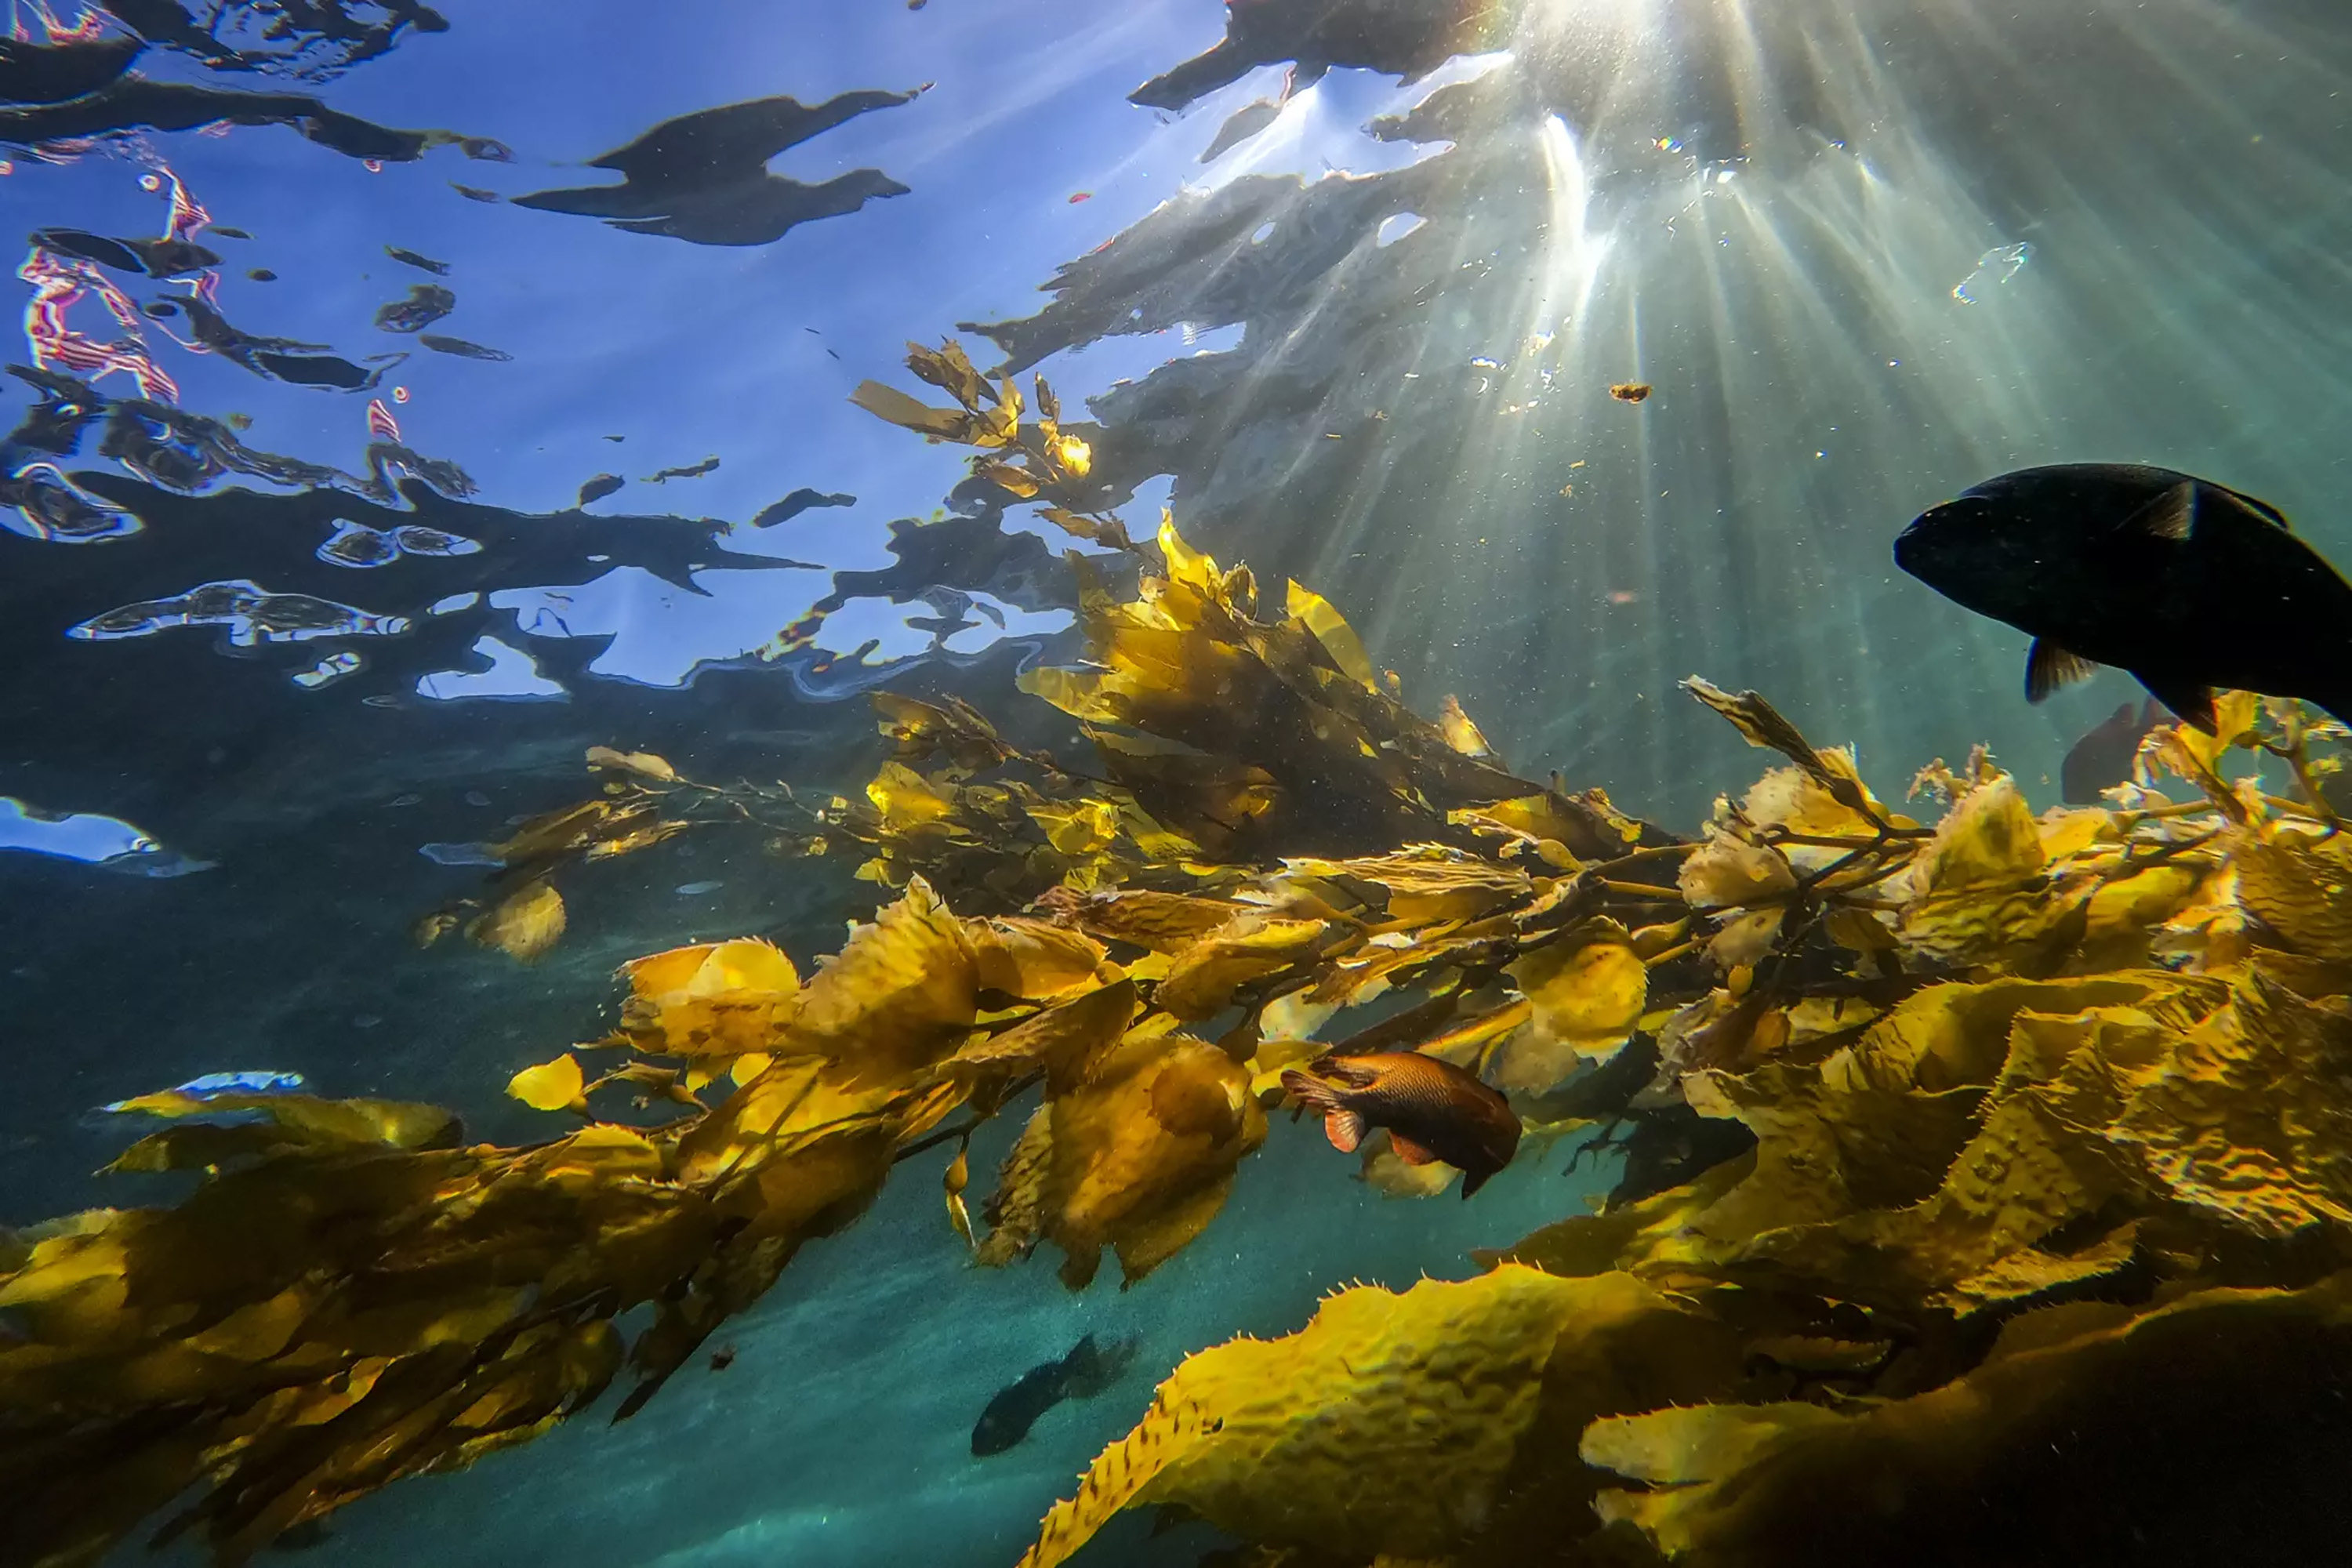 About half the world’s oxygen is produced by marine photosynthesis. Photo: TNS